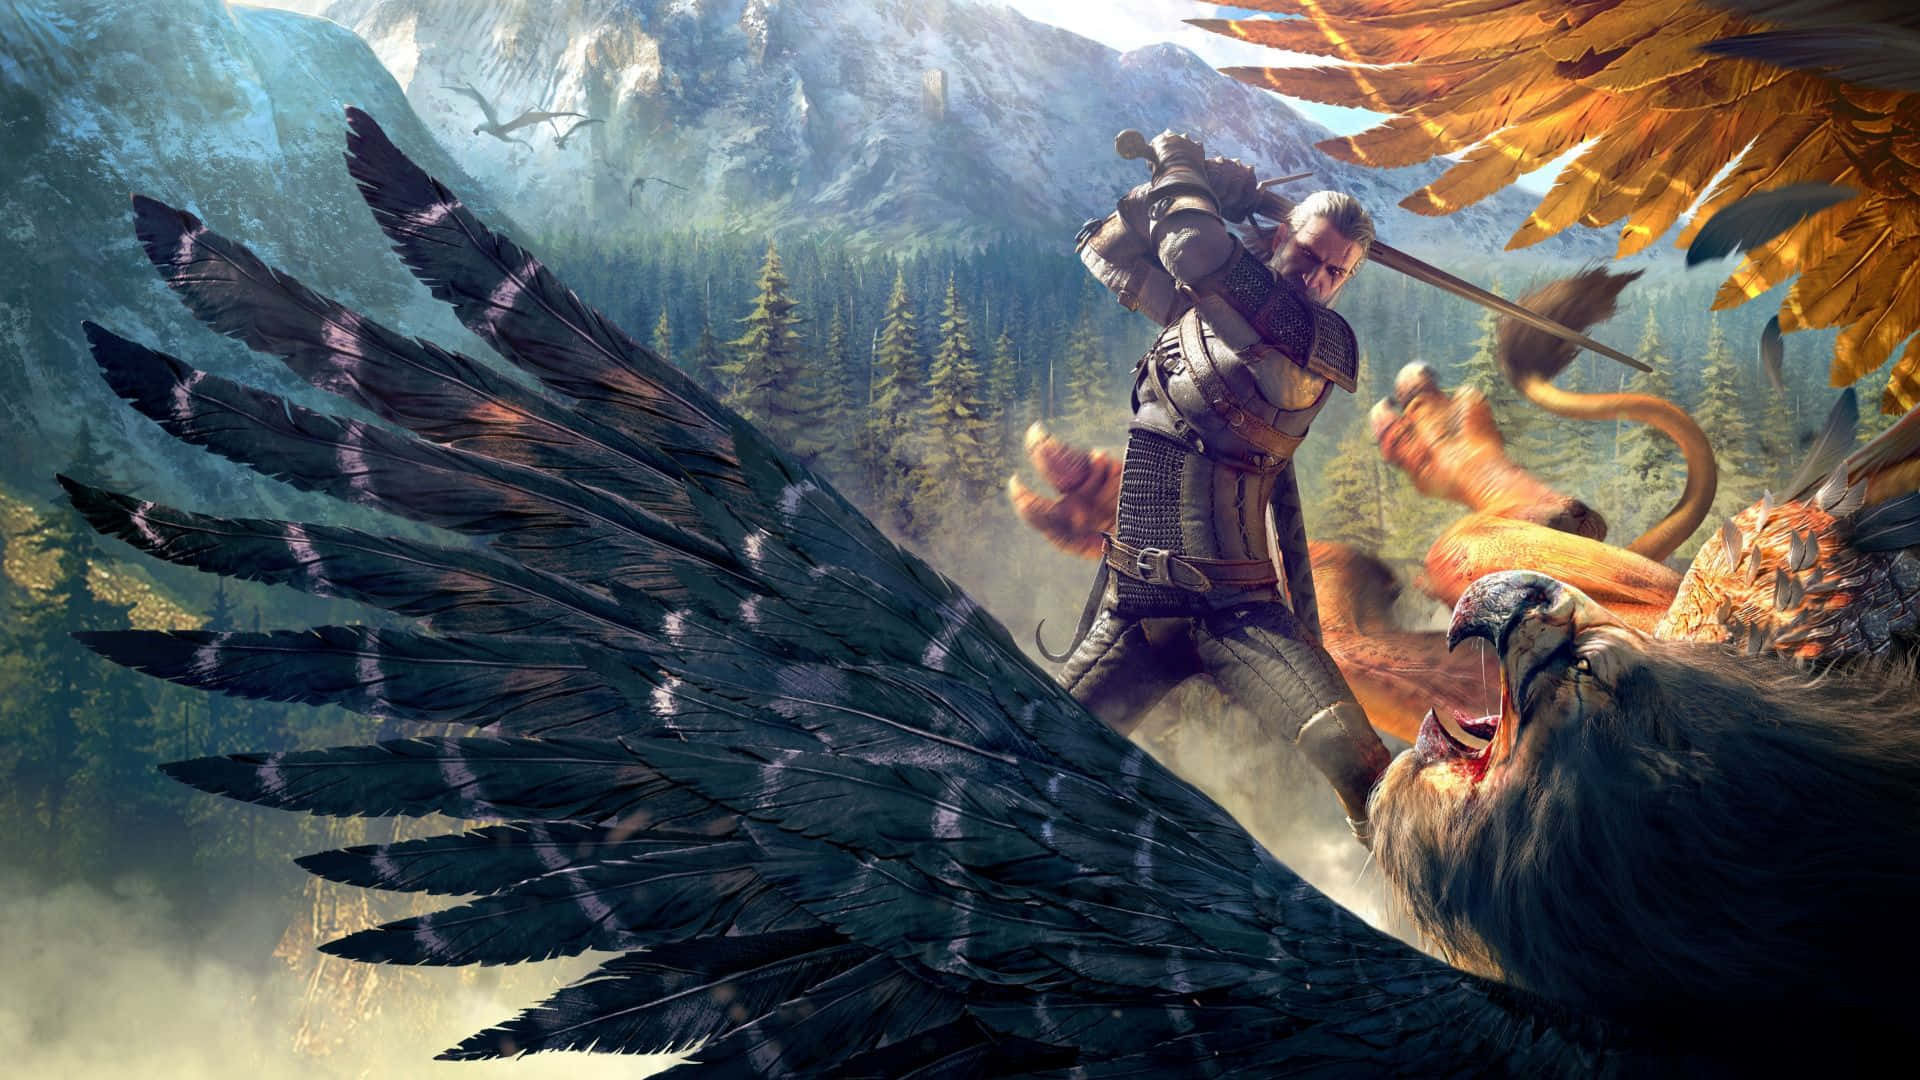 “Explore the Open-World Adventure of The Witcher 3: Wild Hunt”